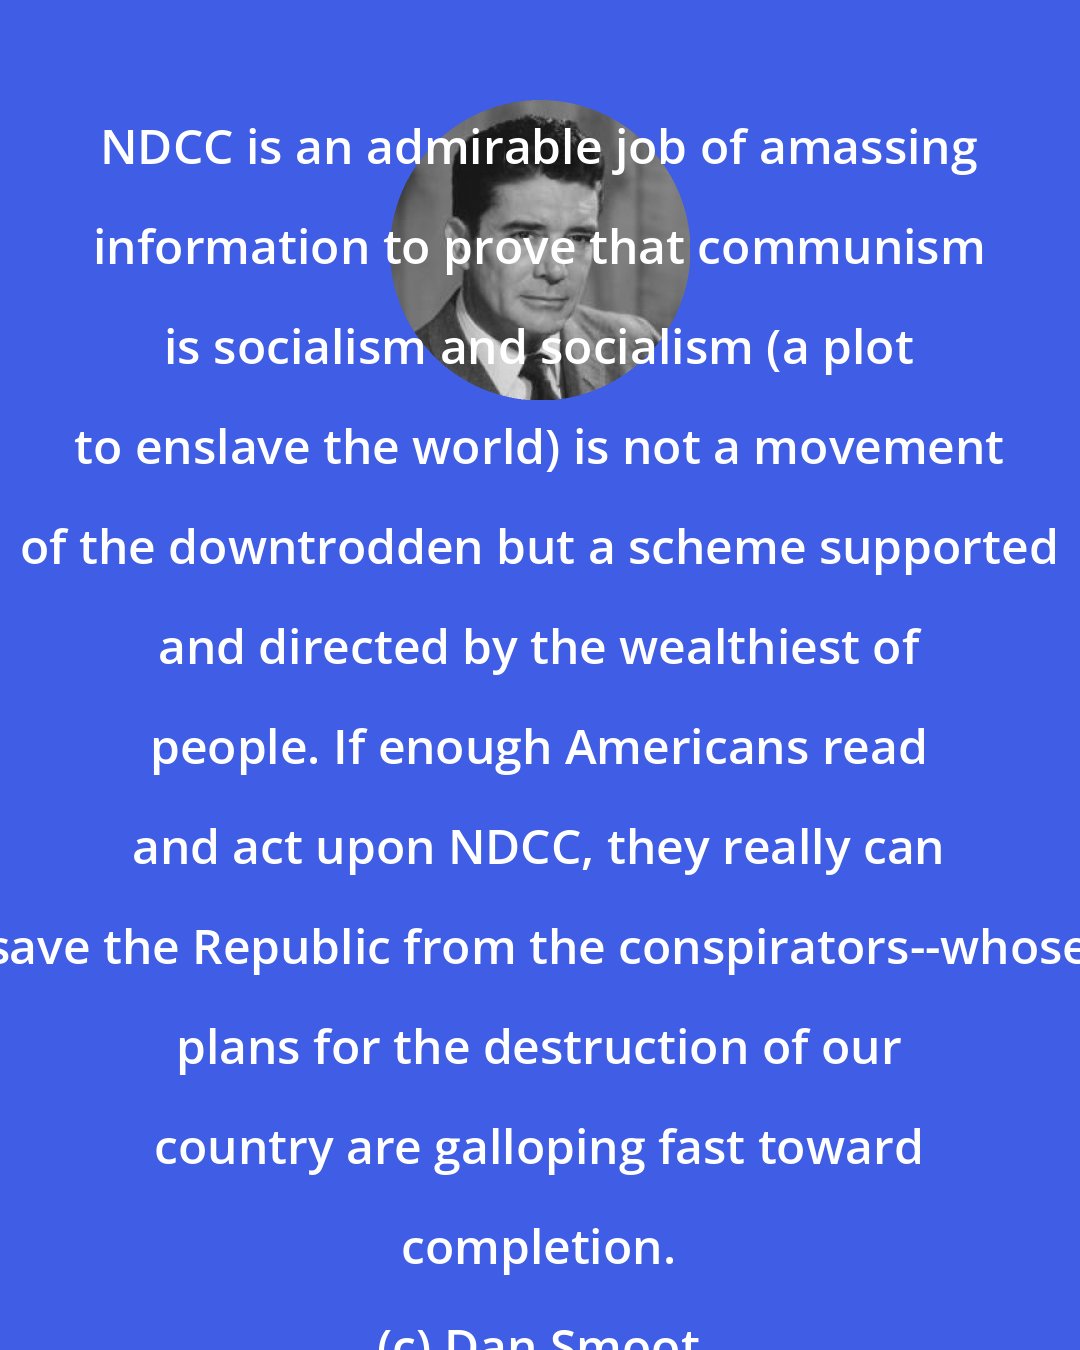 Dan Smoot: NDCC is an admirable job of amassing information to prove that communism is socialism and socialism (a plot to enslave the world) is not a movement of the downtrodden but a scheme supported and directed by the wealthiest of people. If enough Americans read and act upon NDCC, they really can save the Republic from the conspirators--whose plans for the destruction of our country are galloping fast toward completion.